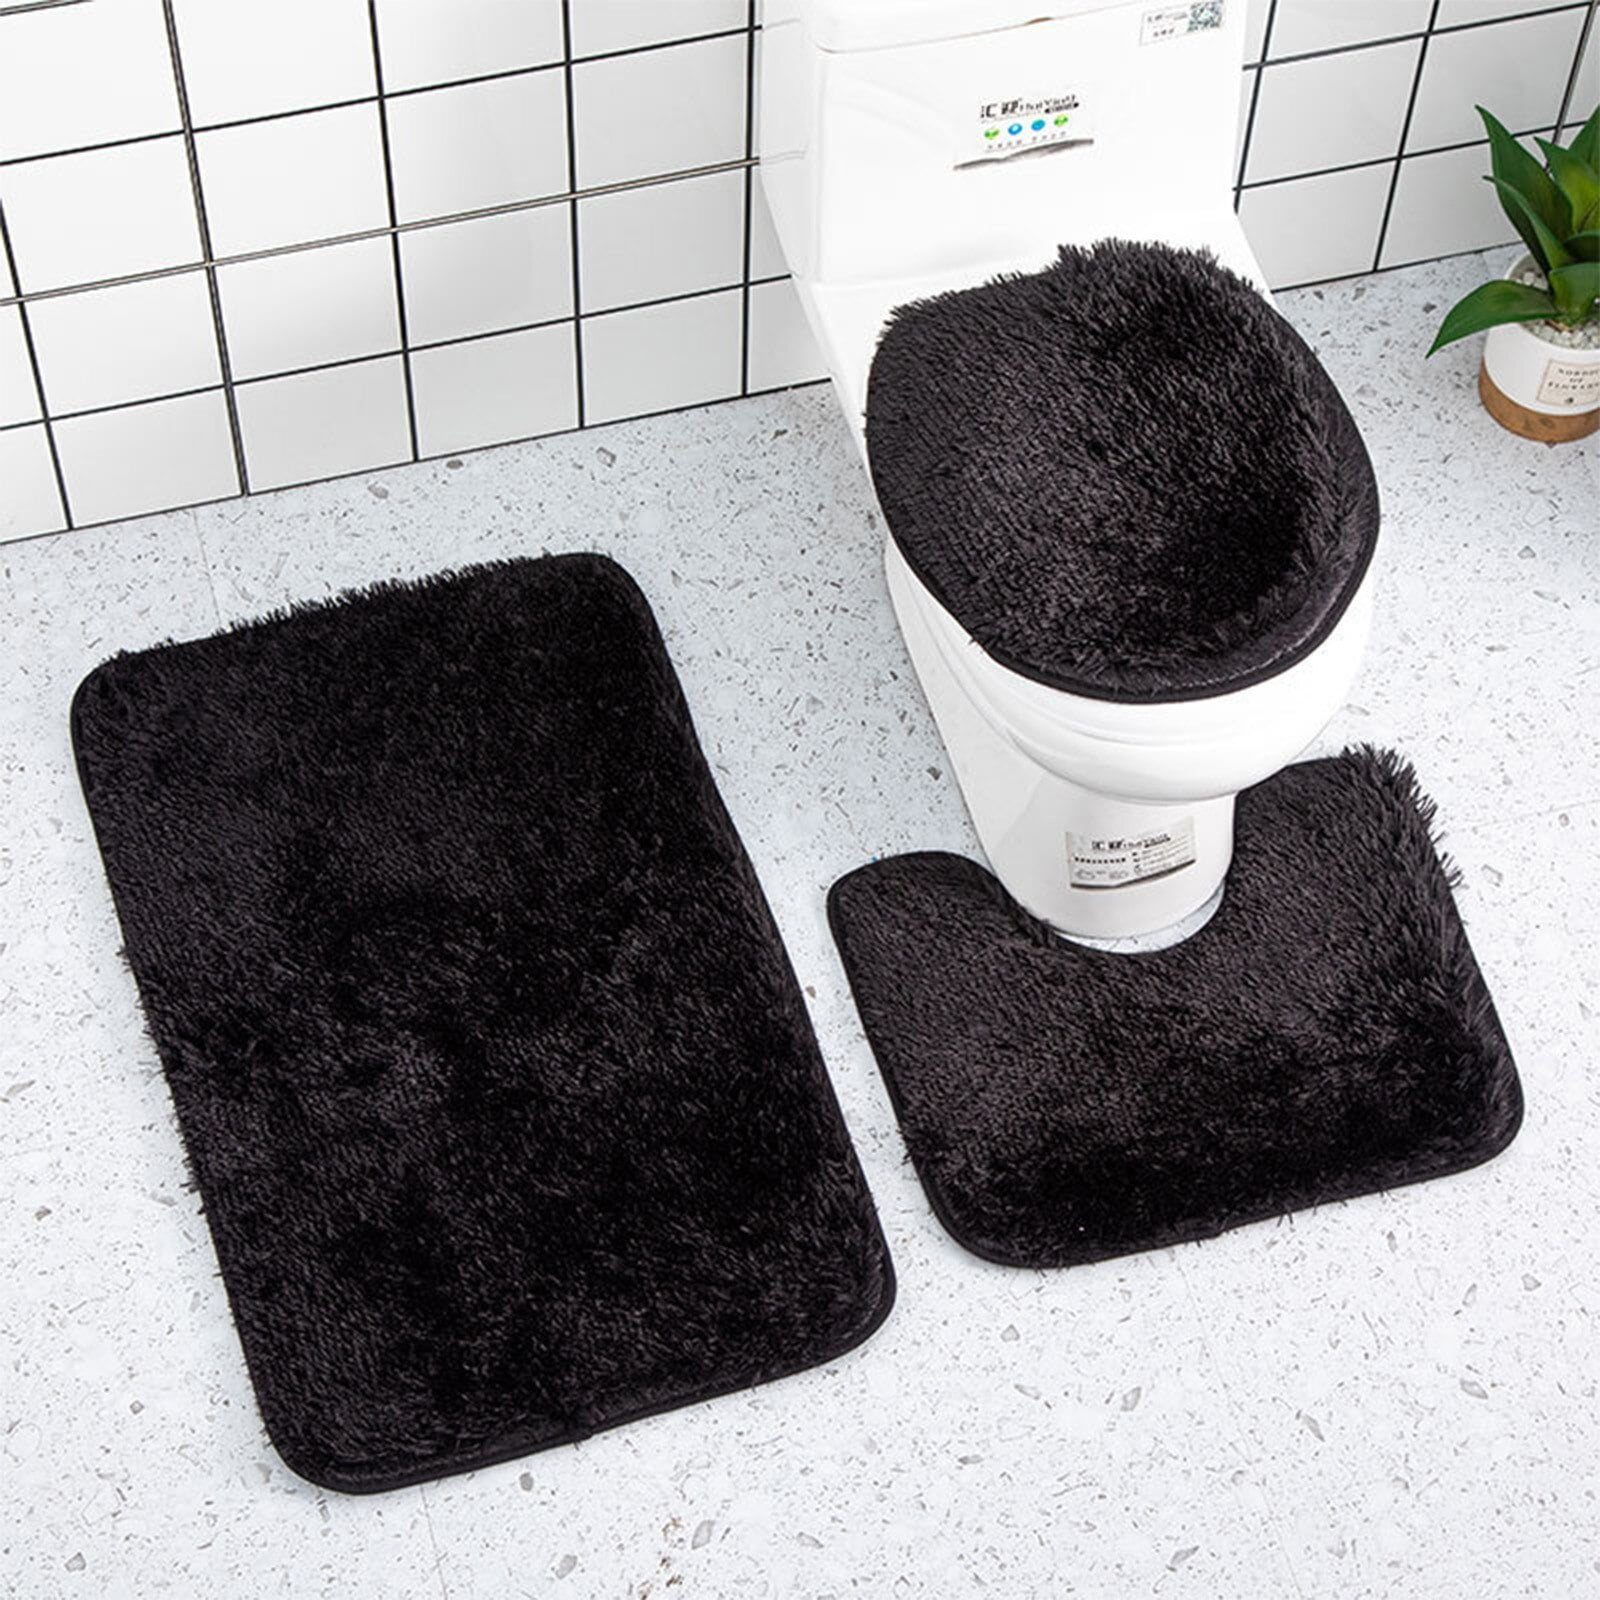 TREETONE Chenille Bath Mat 3 Piece Bathroom Rugs Set , 20x20 Inches U-Shape Contoured Toilet Mat & 20x32 Inches Rug & 1 Lid Cover ,Soft Water